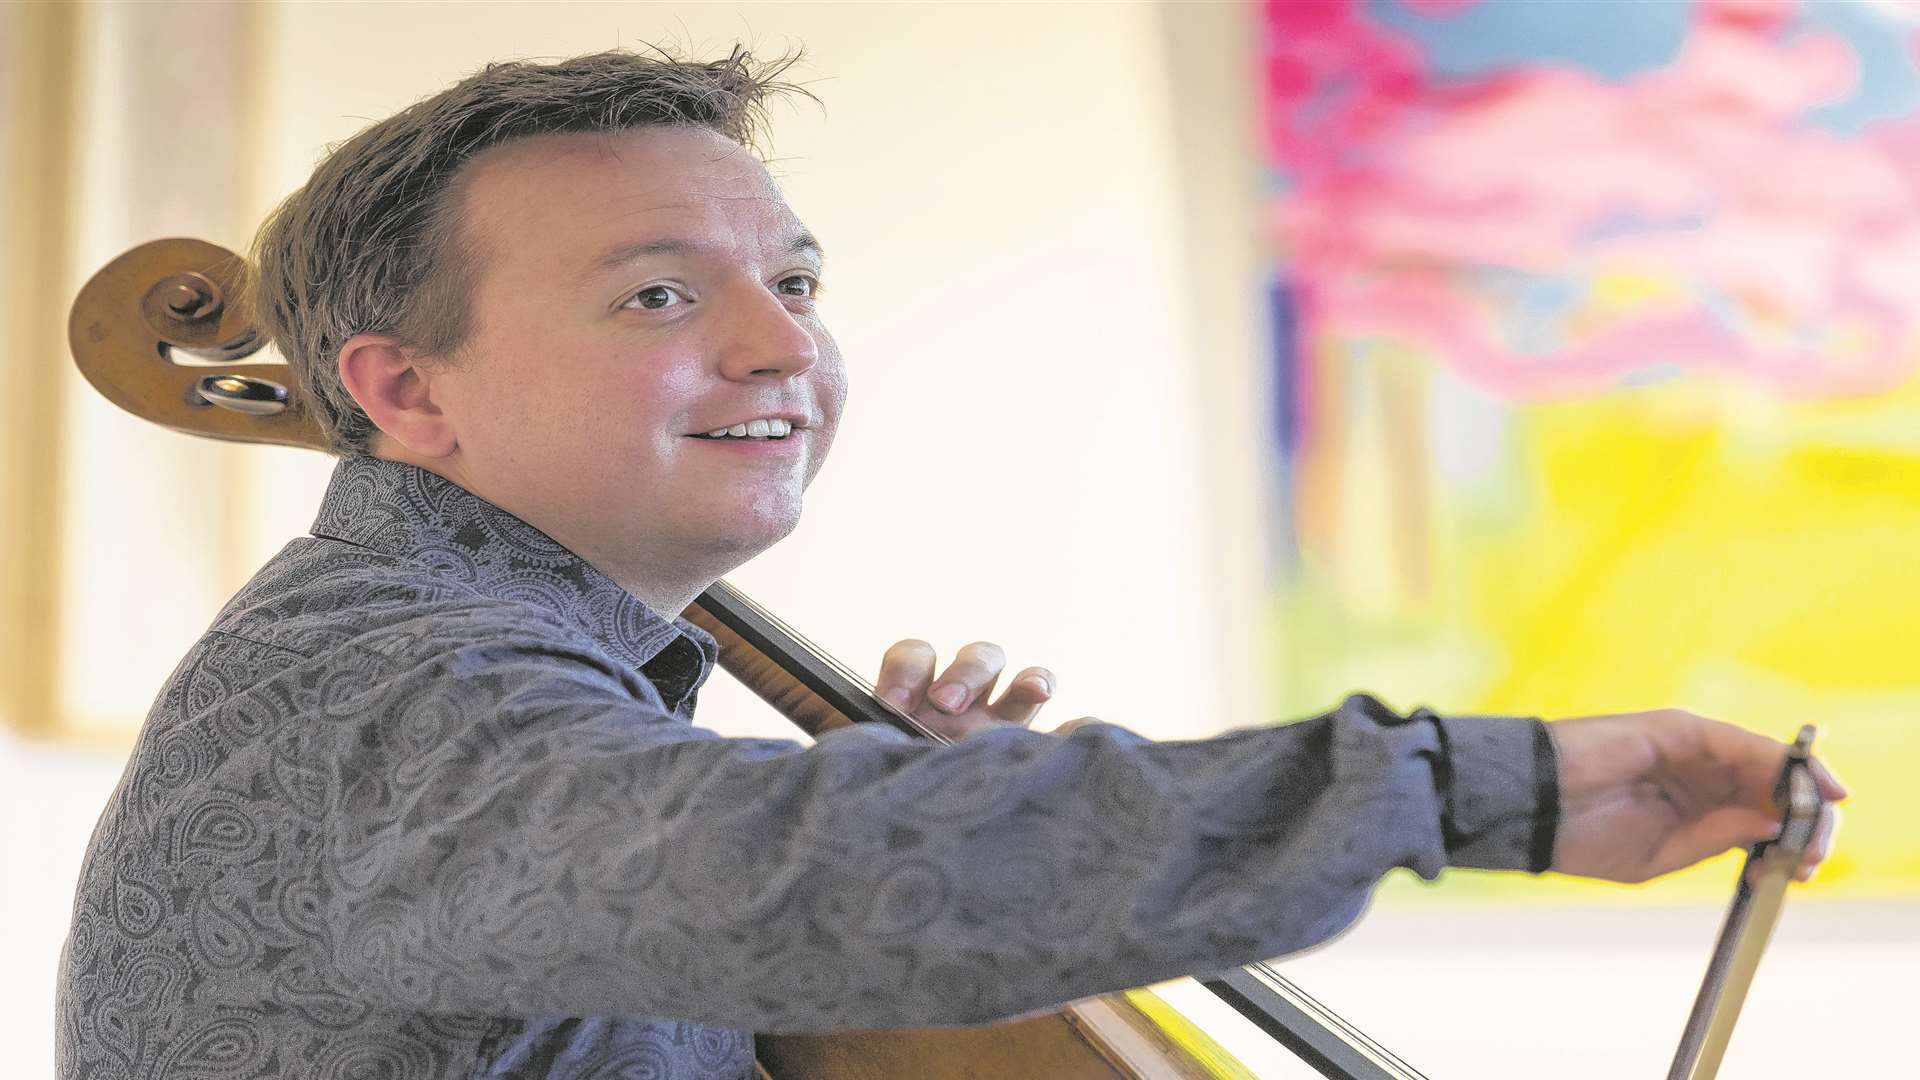 Cellist Richard Harwood will be among world class performers coming to West Malling